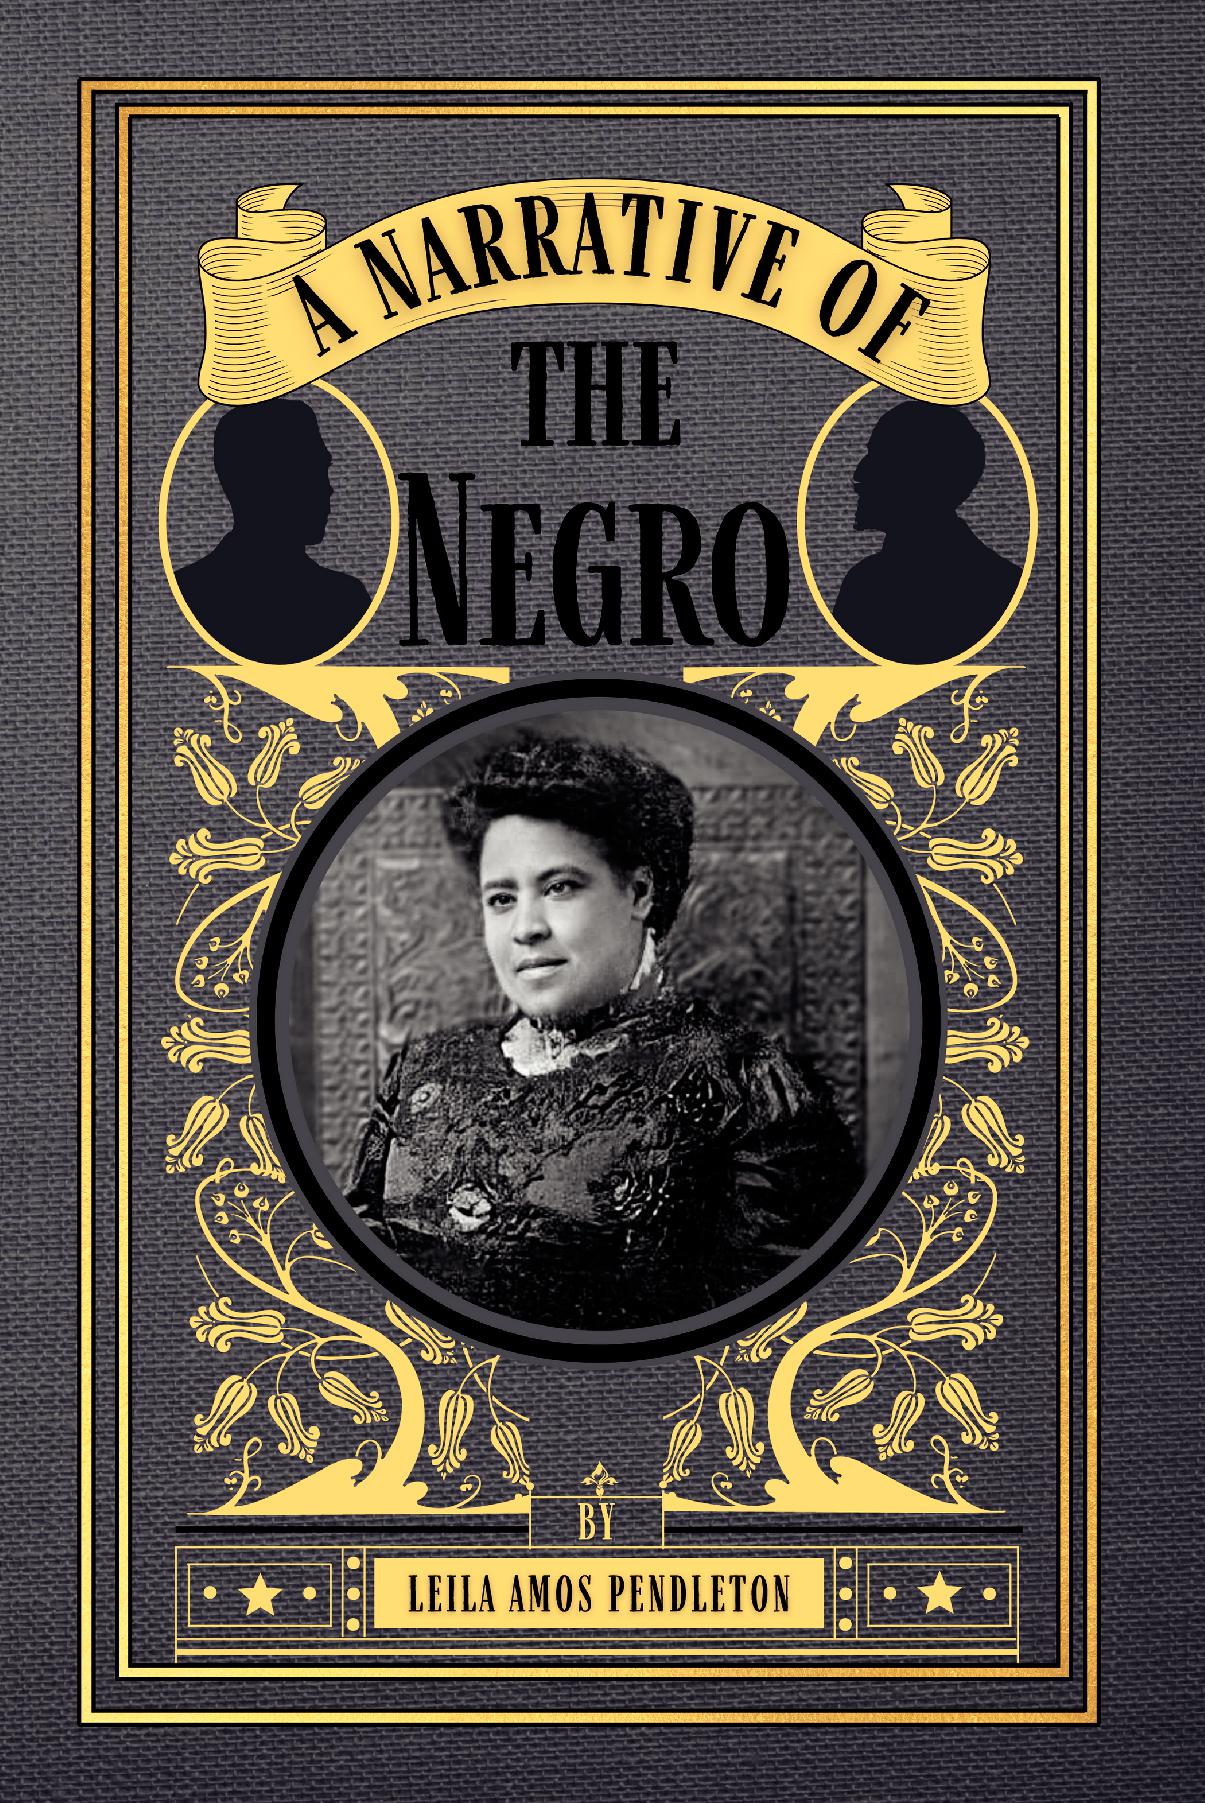 The flat cover of the book A Narrative of the Negro in grey canvas, pale and golden yellows, and black. A portrait of the author, Leila Amos Pendleton, is enrcircled by decorative yellow flower vines and silhouettes of two black men help frame the book's title.